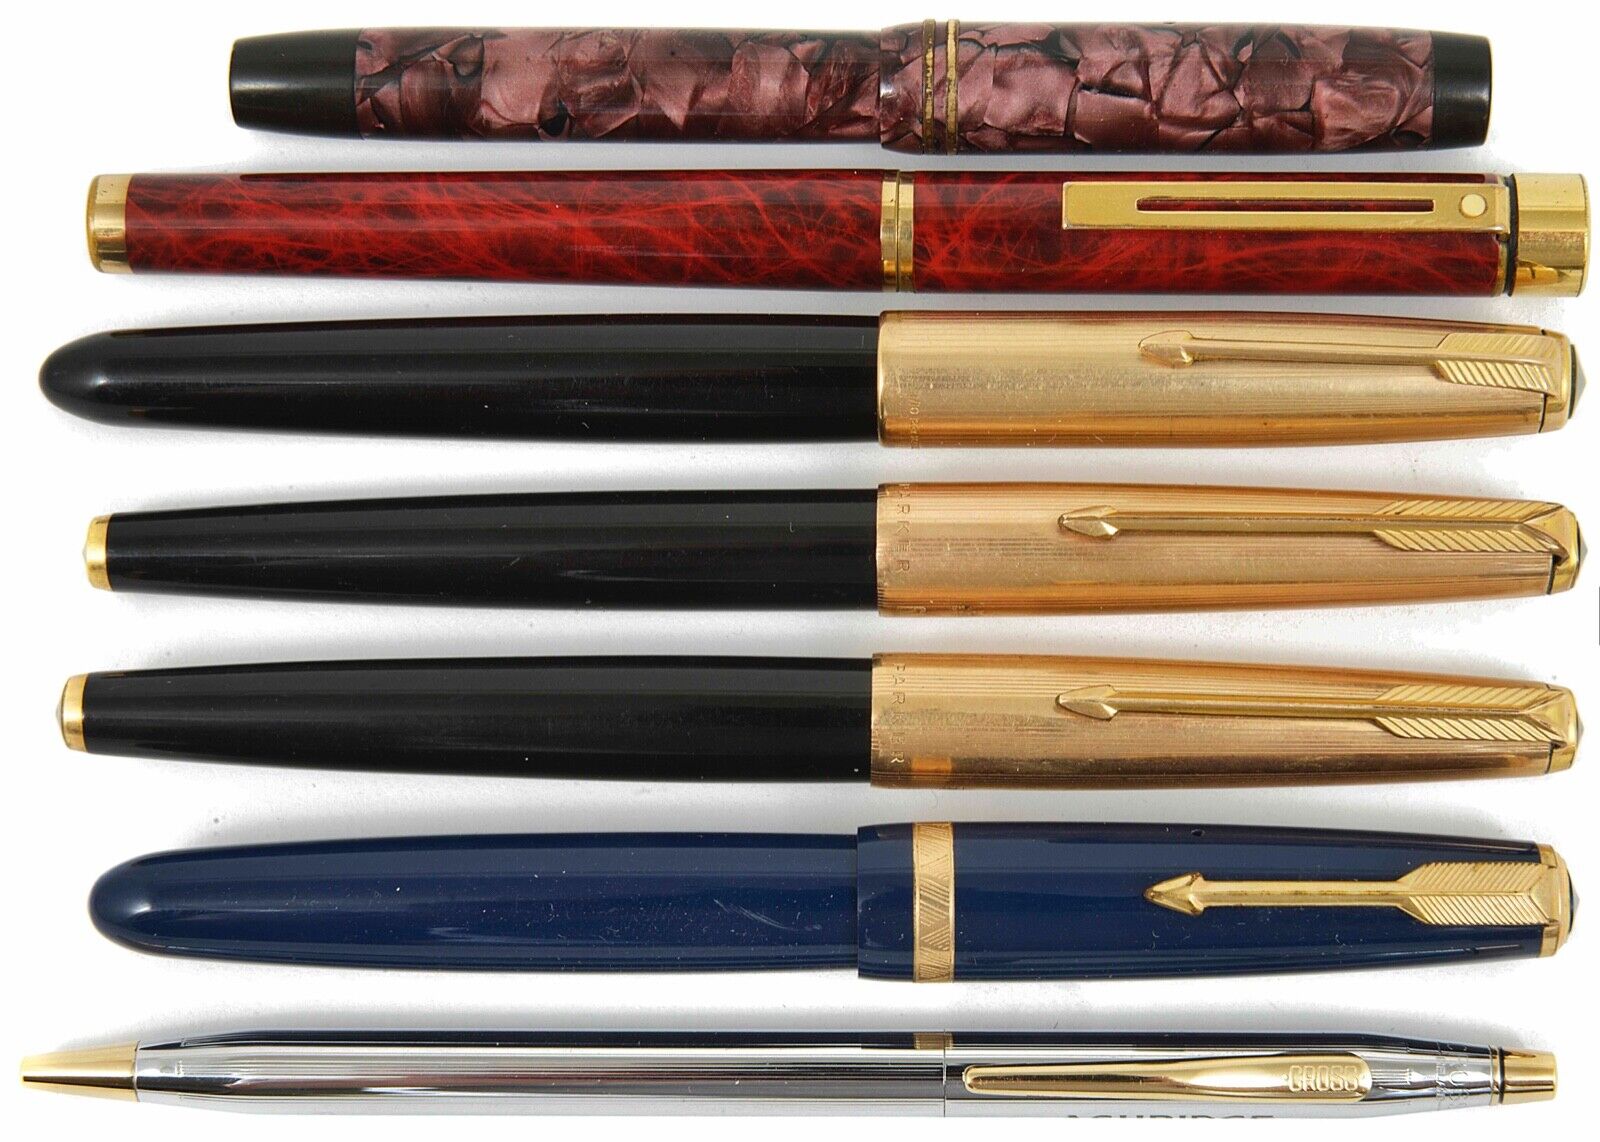 A collection of 7 fountain pens and others: Sheaffers, Parkers and Cross